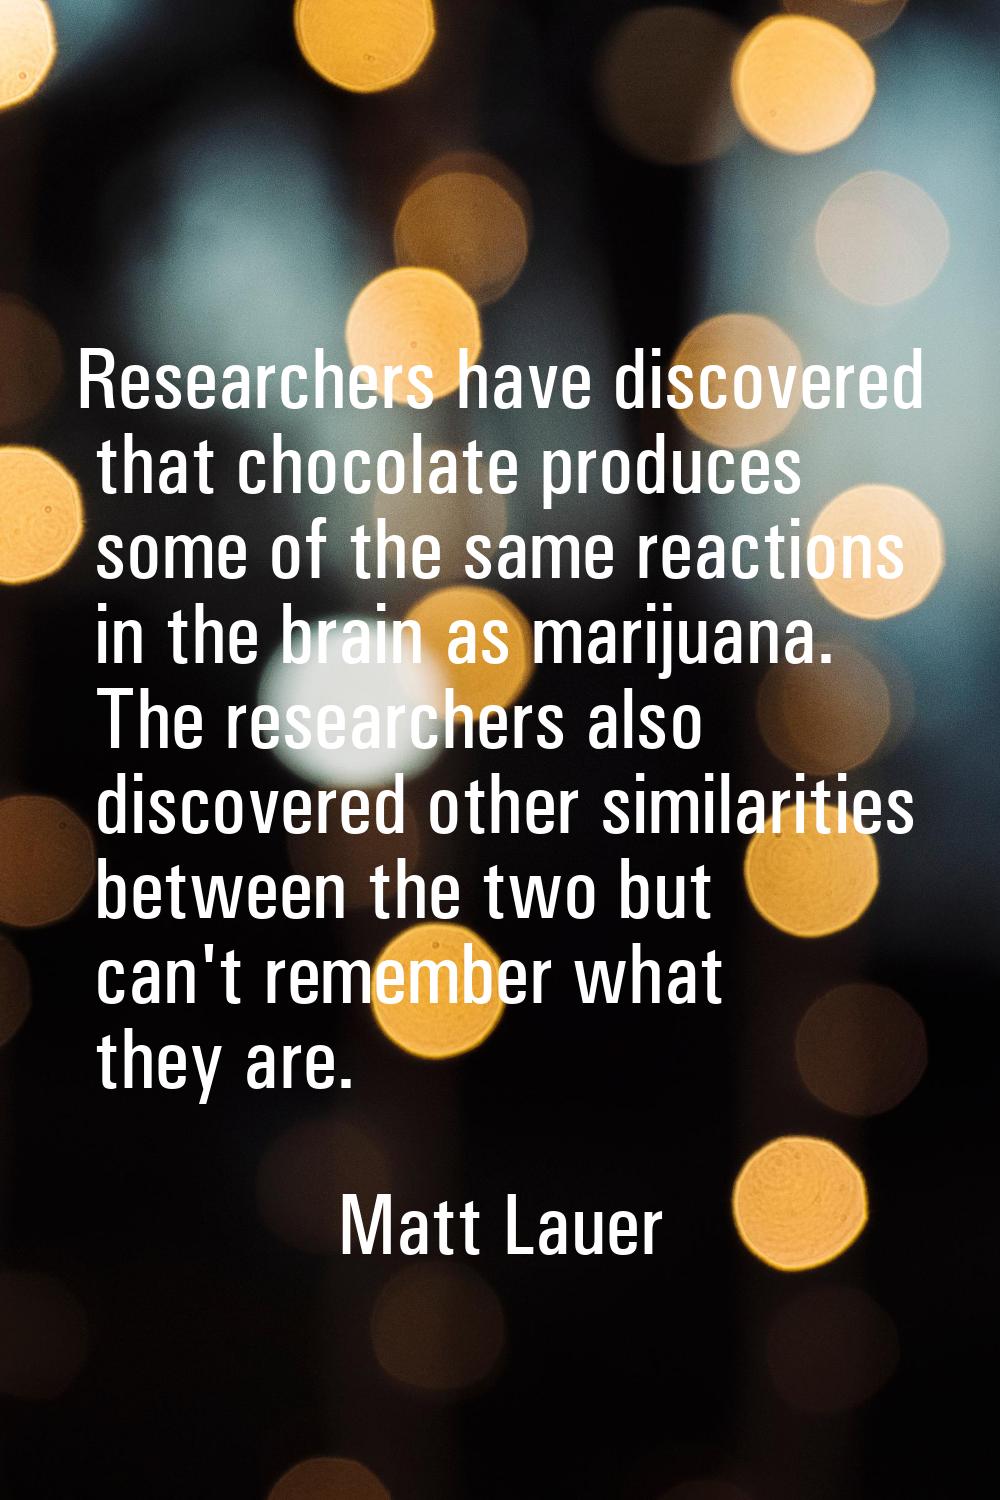 Researchers have discovered that chocolate produces some of the same reactions in the brain as mari